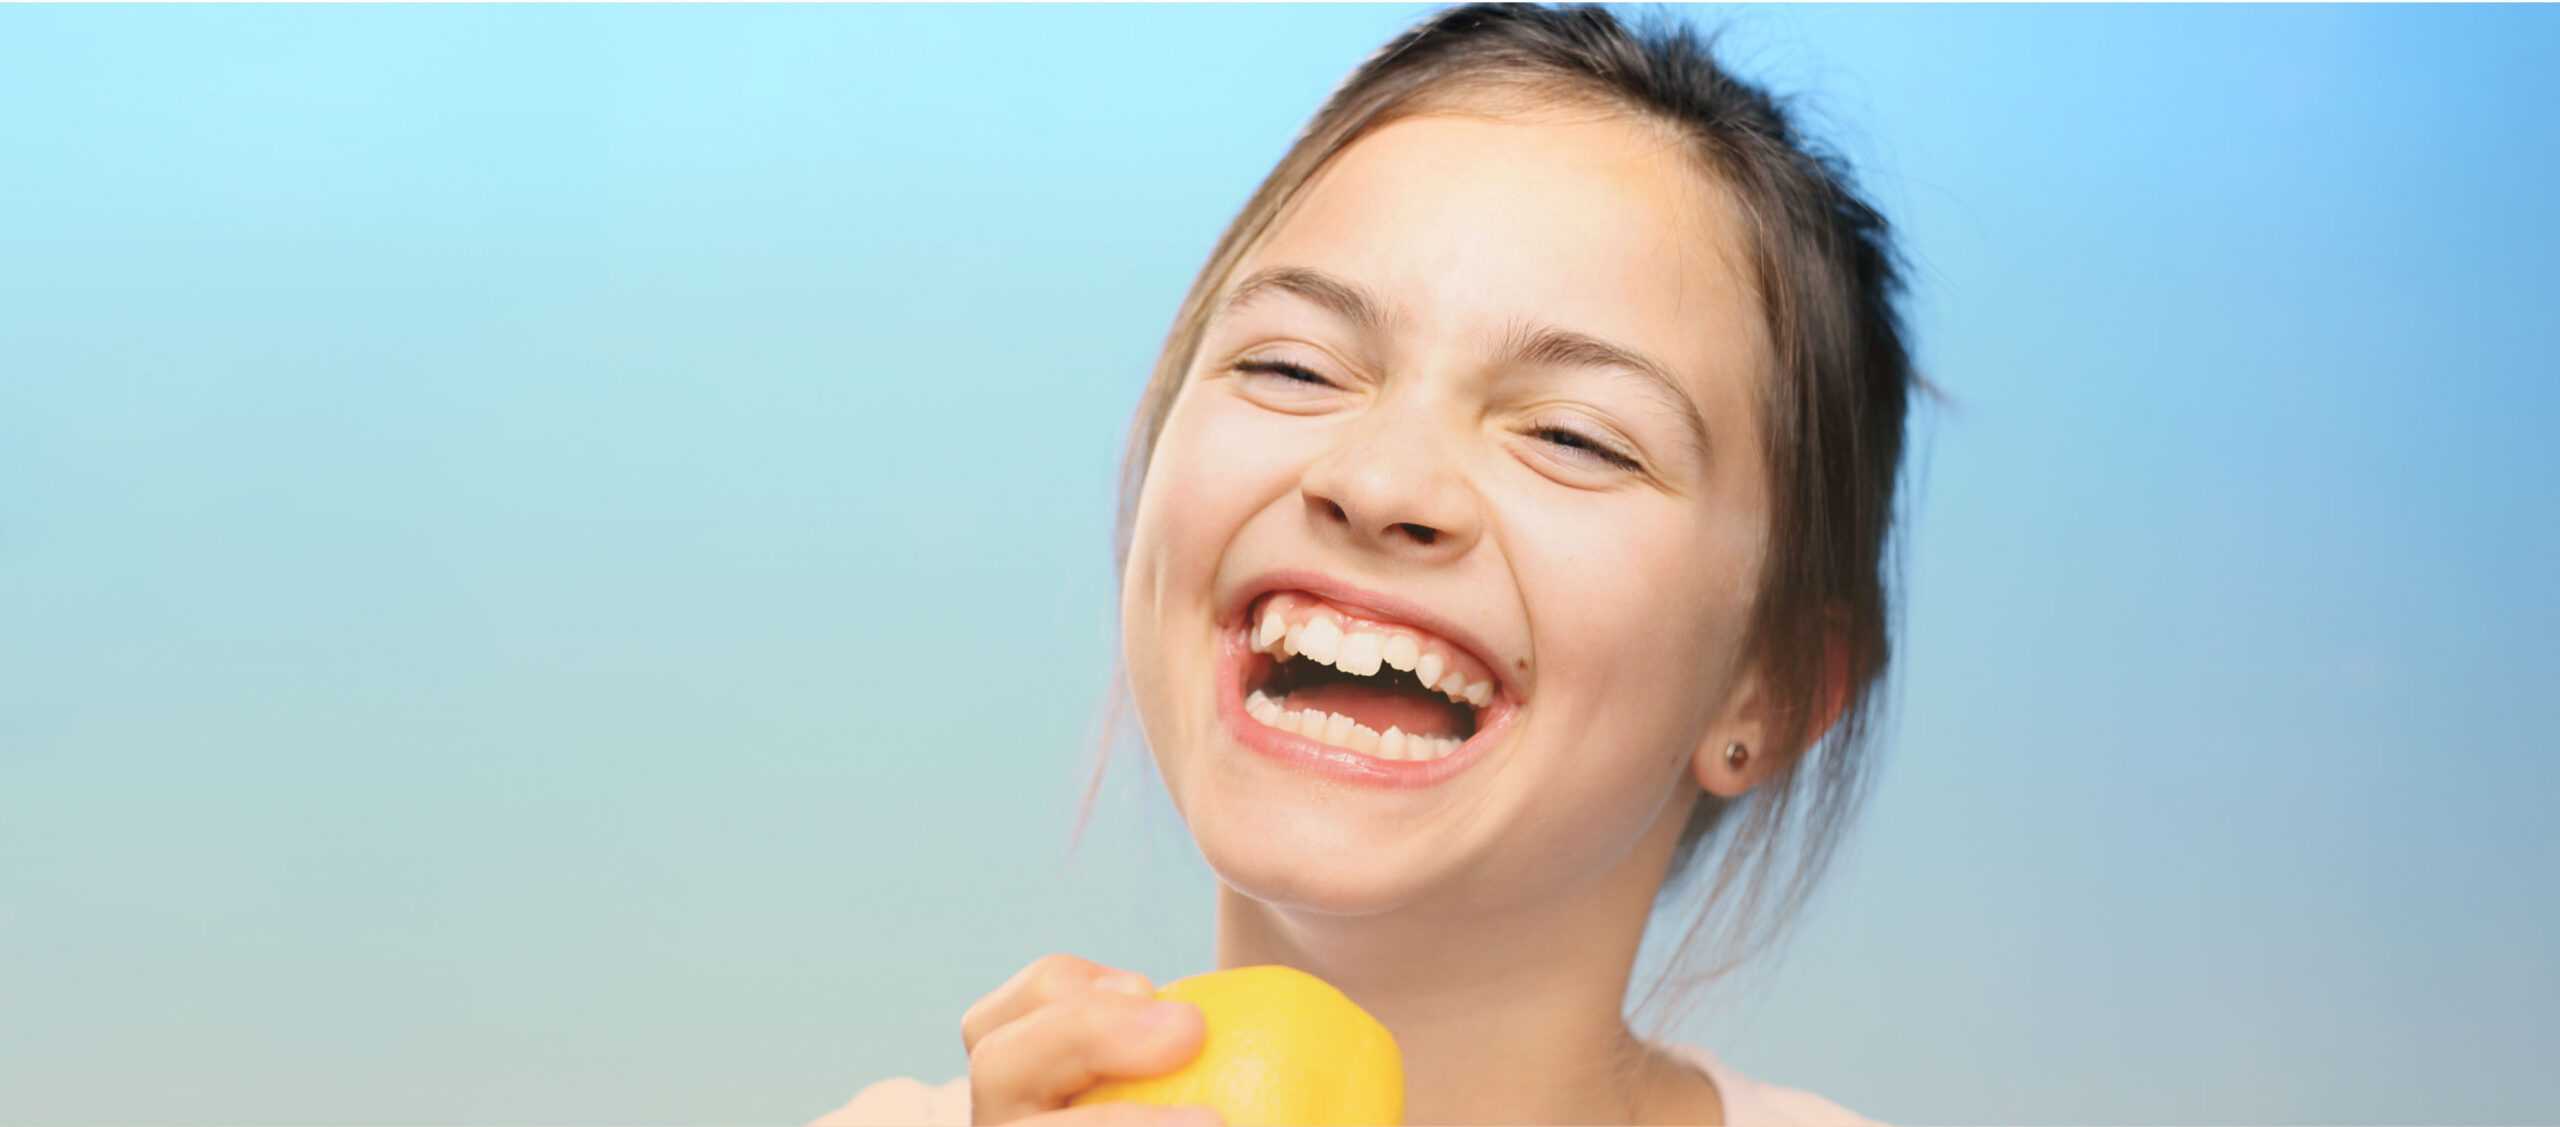 Tween girl with a piece of fruit in her hand laughs, tossing her head back.